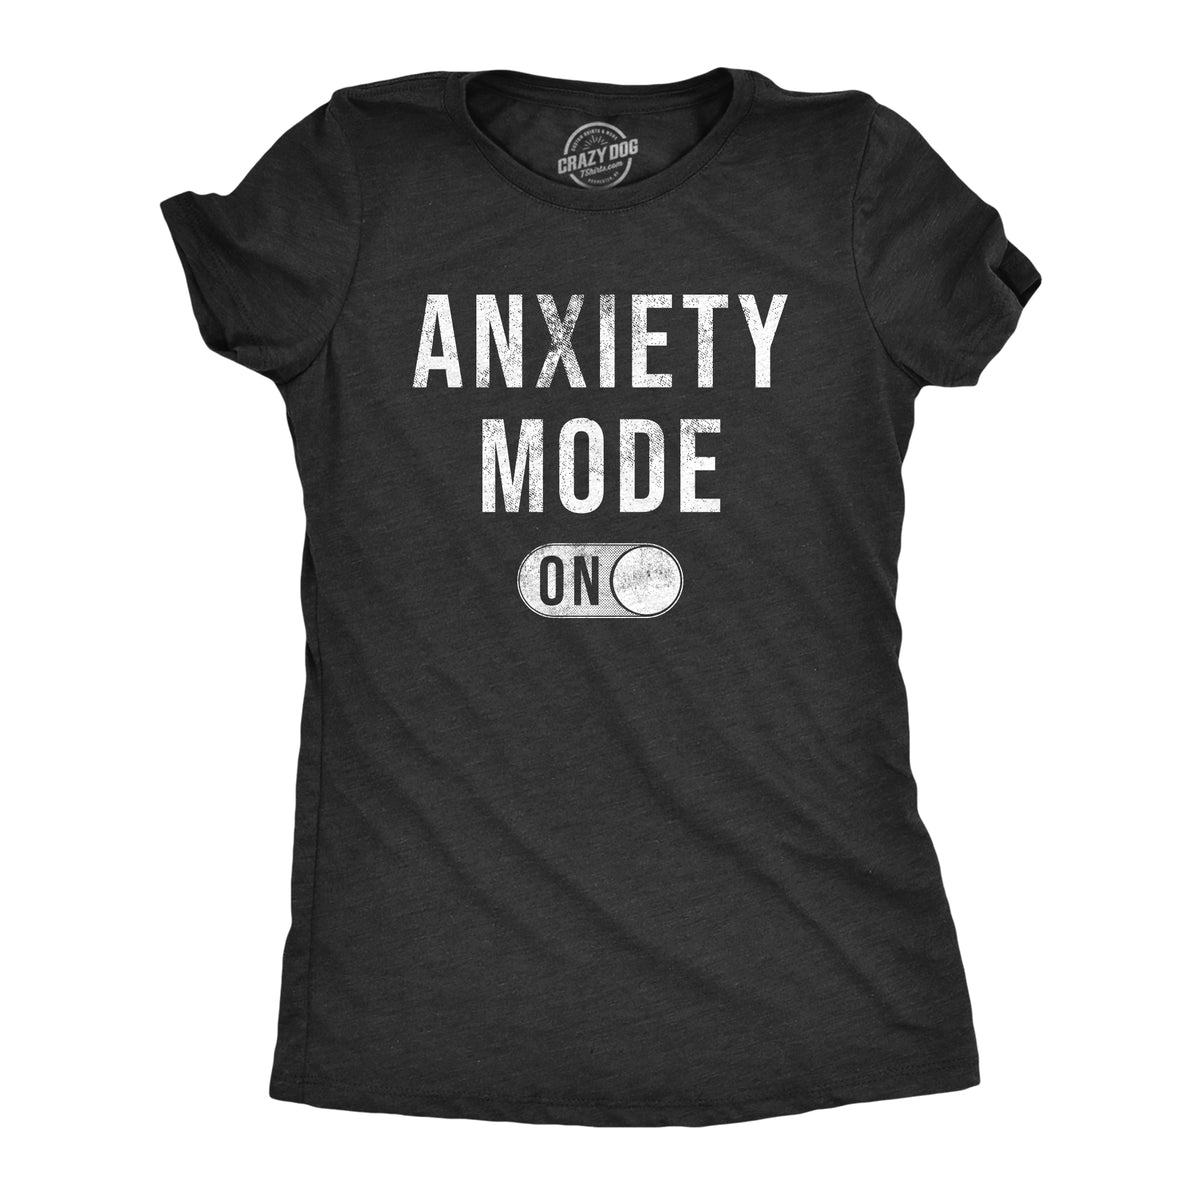 Funny Heather Black - ANXIETY Anxiety Mode On Womens T Shirt Nerdy sarcastic Tee